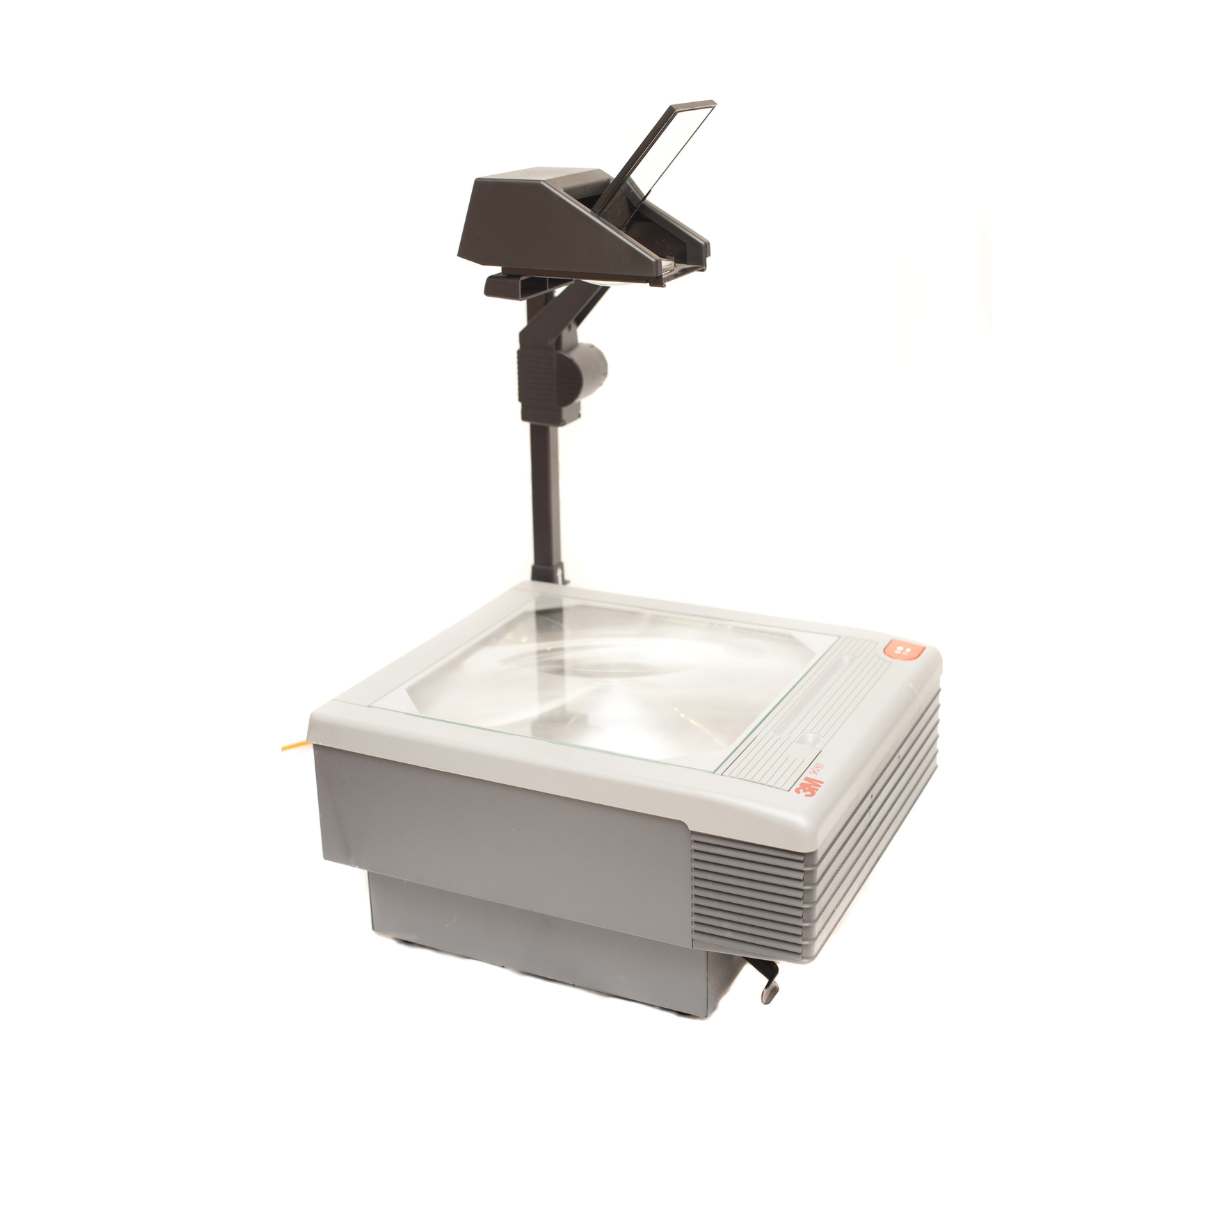 How Does An Overhead Projector Work